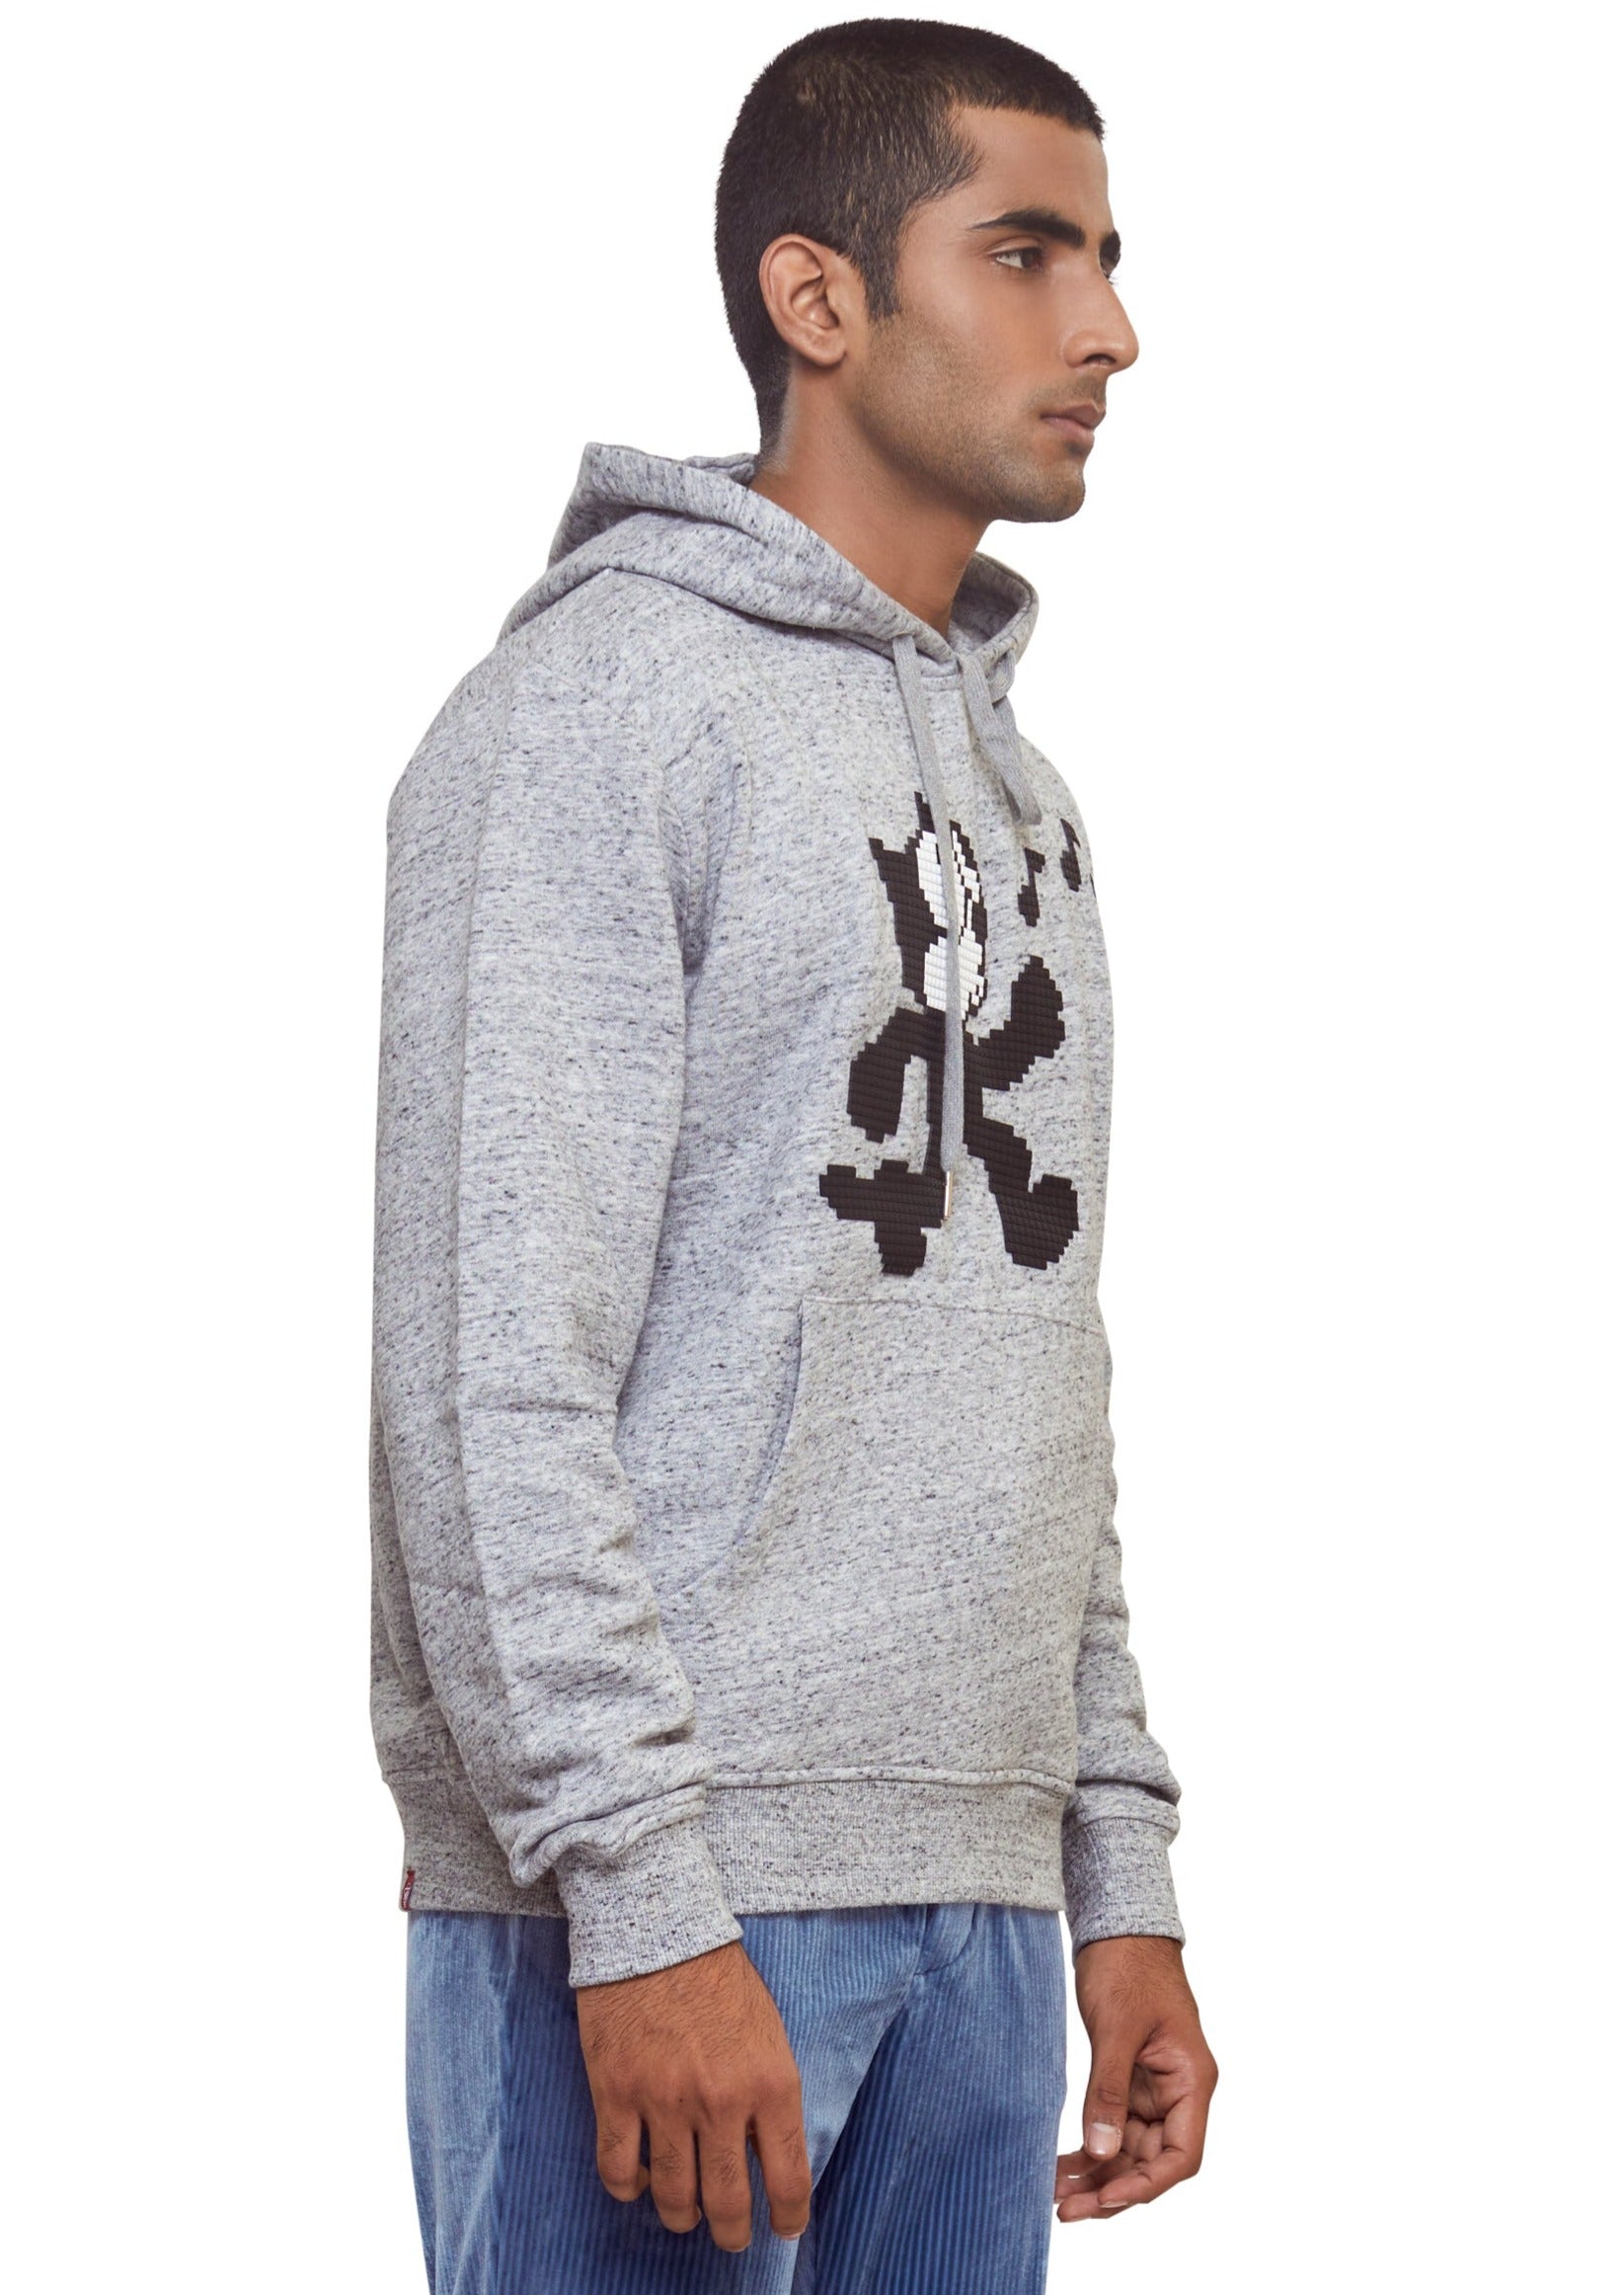 Grey Speckled hoodie with a graphic front design of a whistling felix and kangaroo pocket from the brand 8-bit